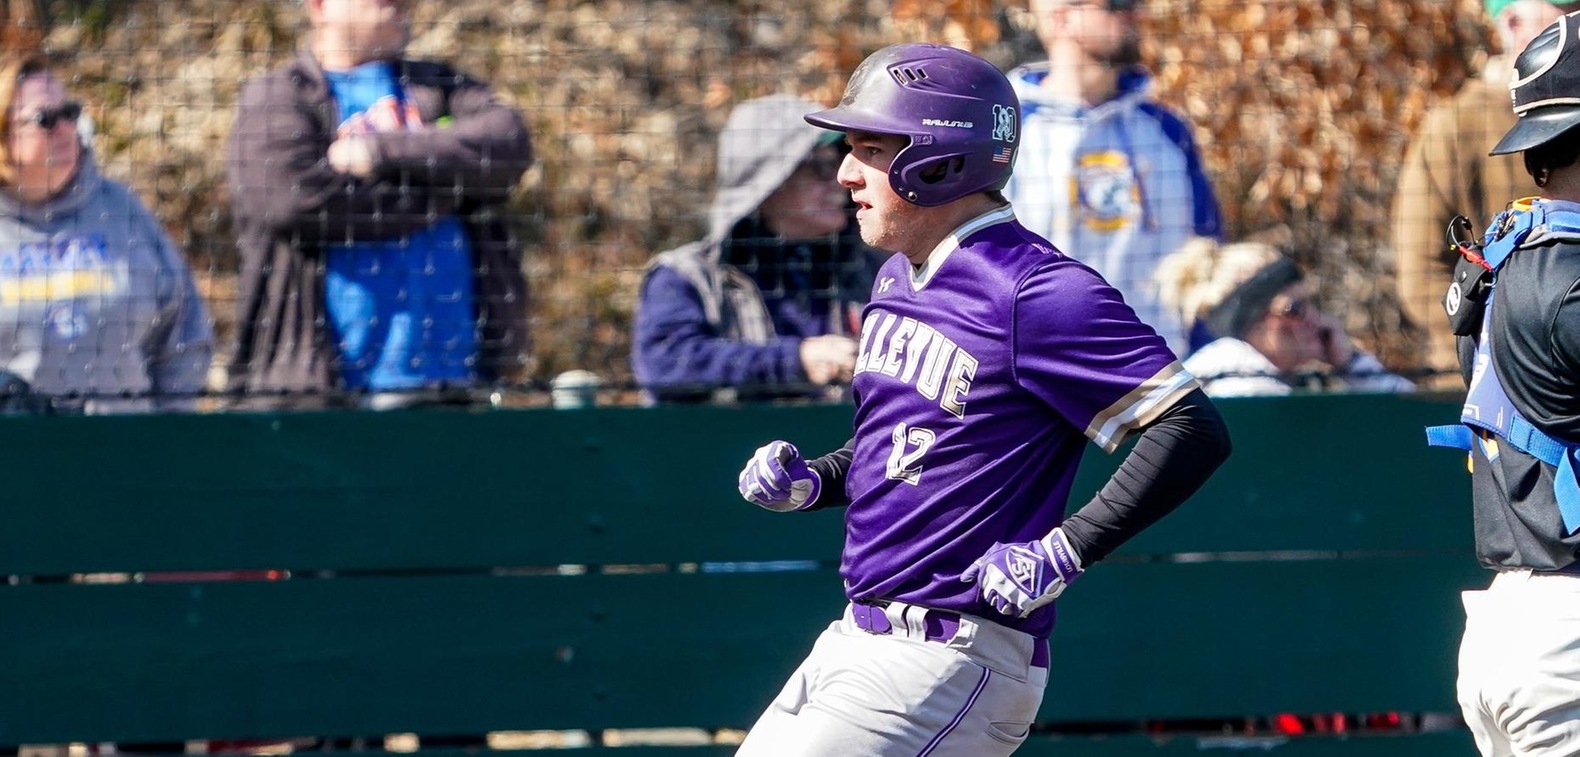 Conner Barnett went 3-for-5 with a double, home run, four RBI, a stolen base, and three runs scored on the day.